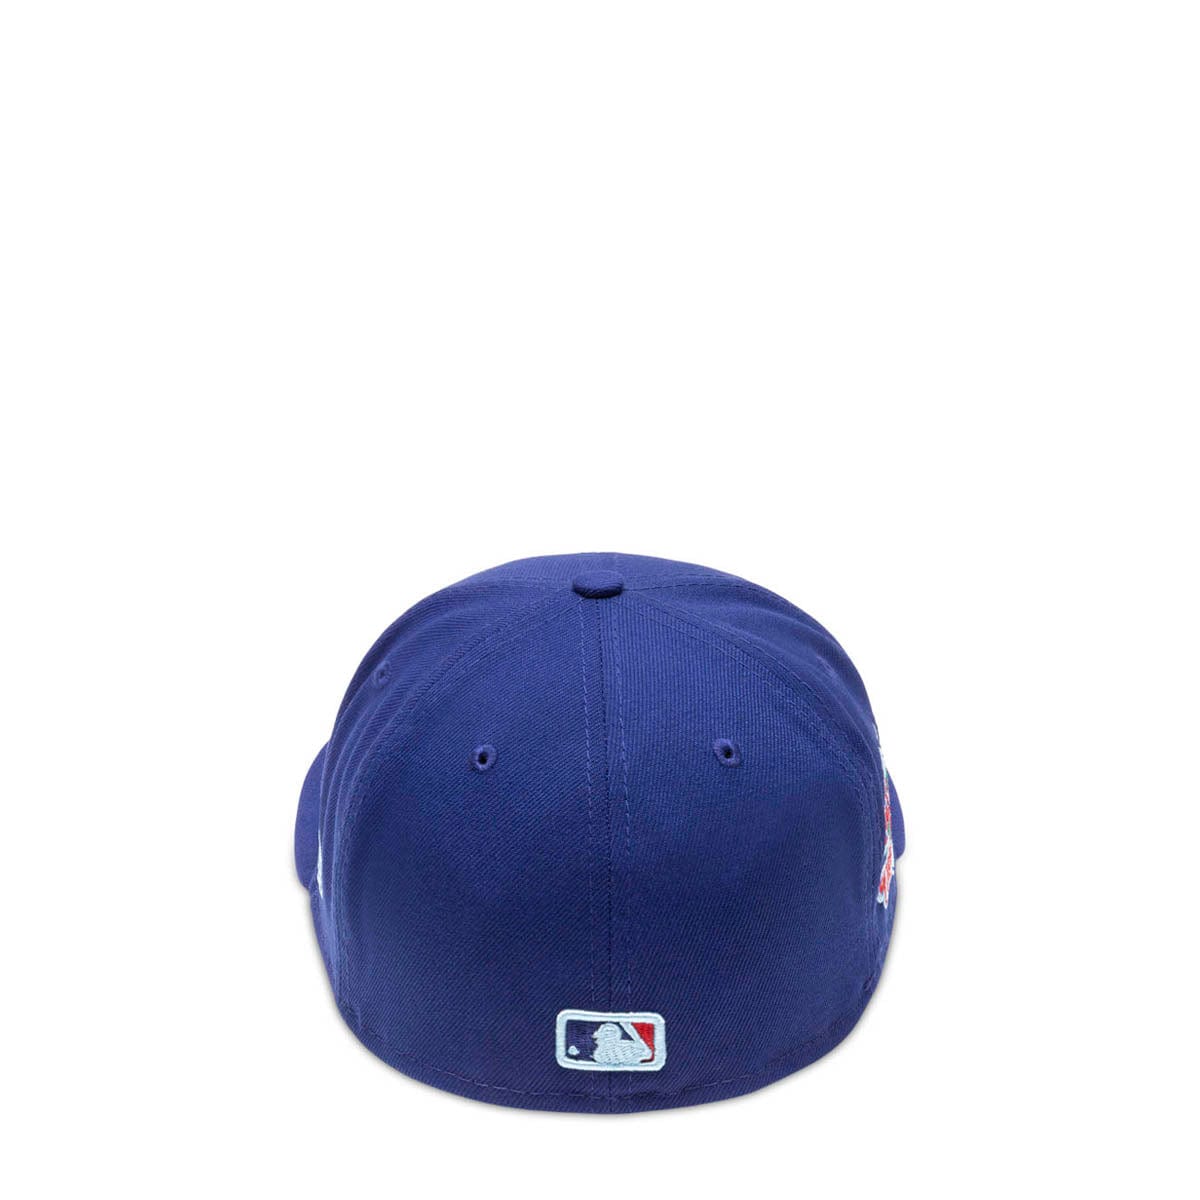 New Era Headwear 59FIFTY LOS ANGELES DODGERS CLOUD UNDER FITTED CAP